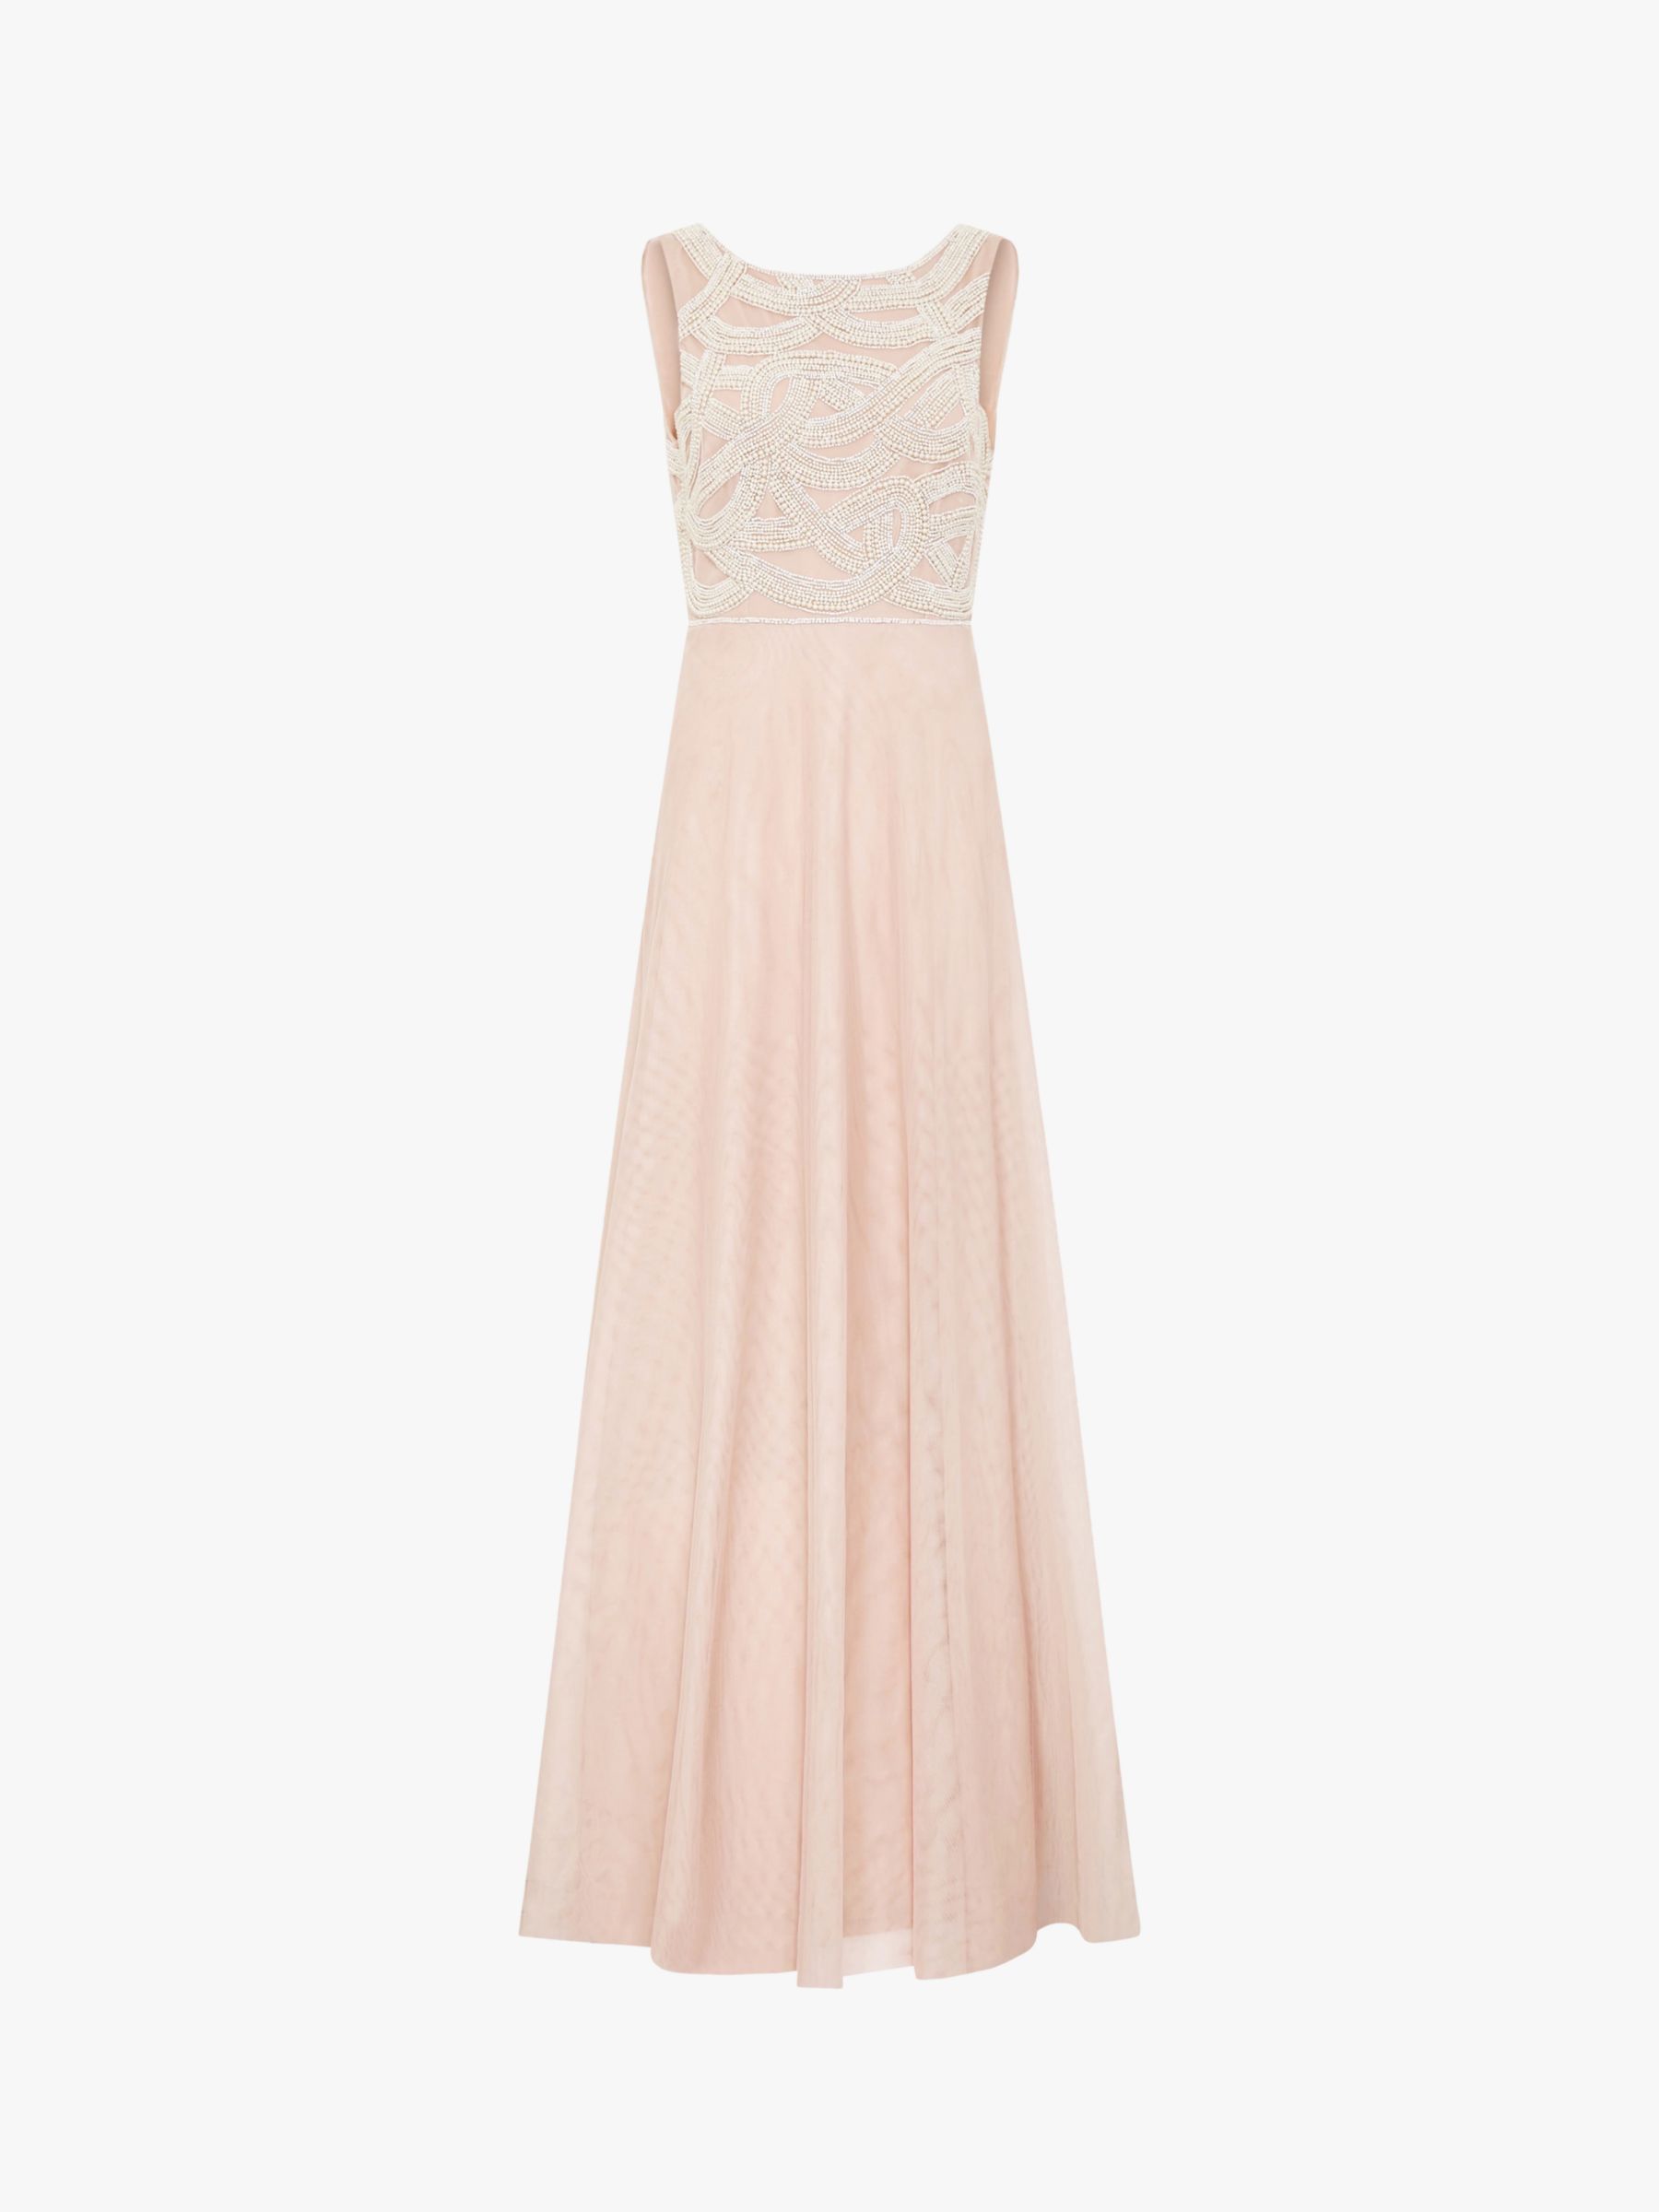 Adrianna Papell Beaded Sleeveless Gown, Shell